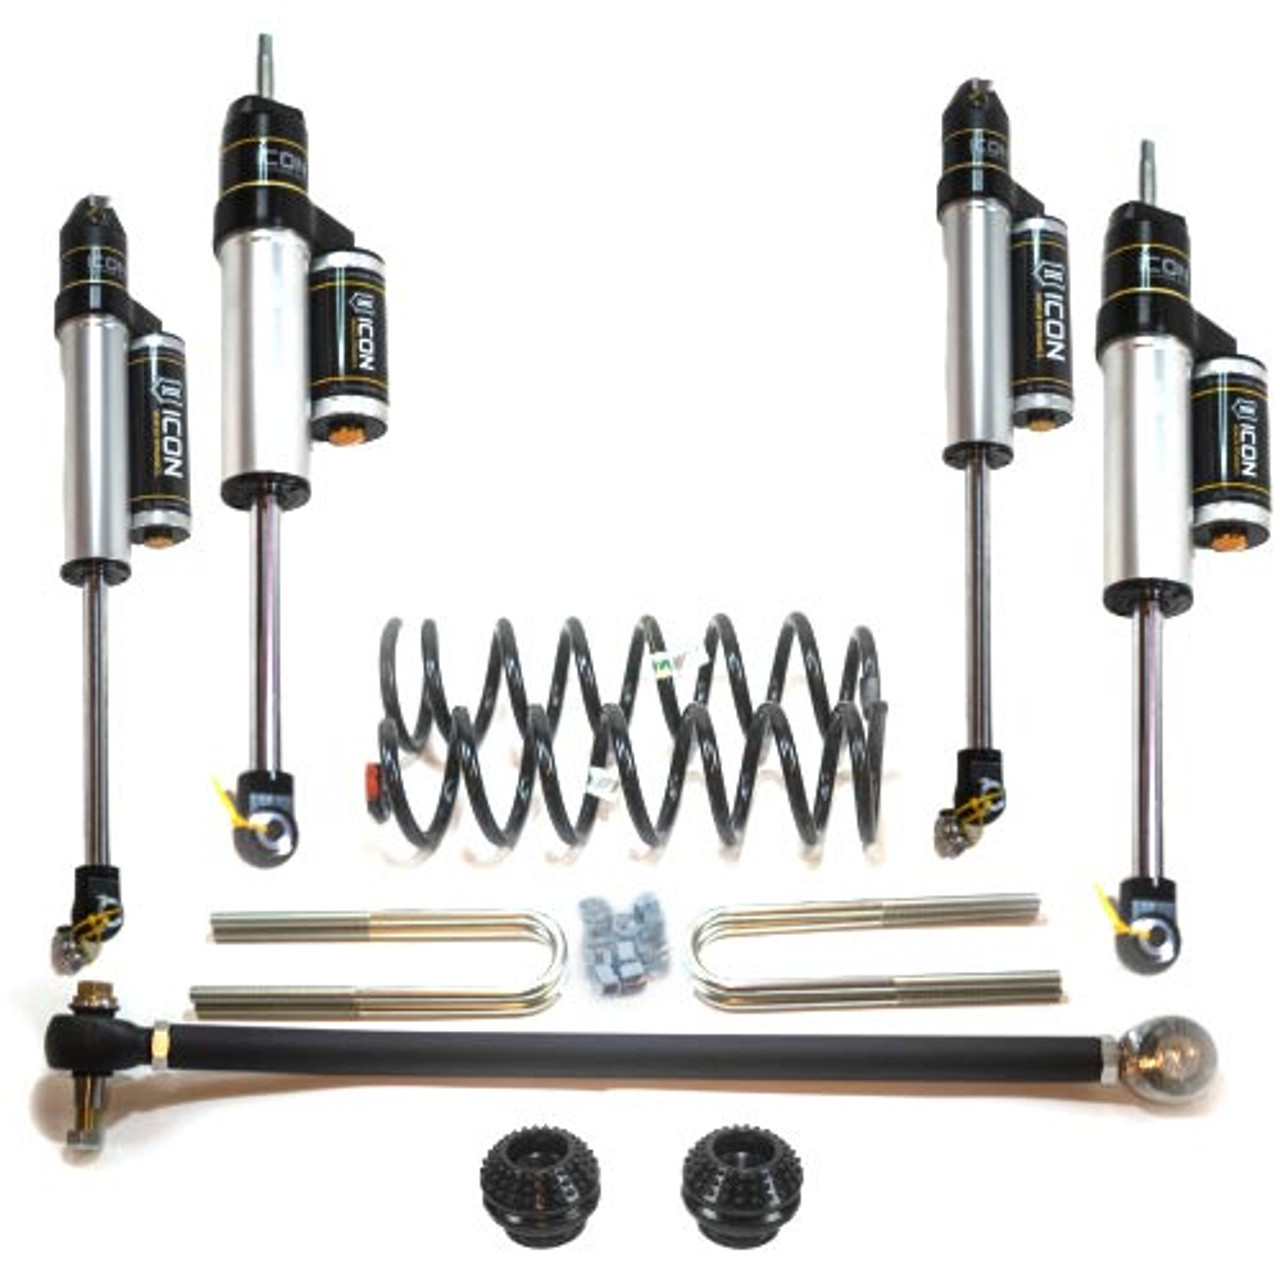 NO LIMIT FABRICATION REVERSE LEVEL KIT WITH 2" SHOCKS 2011-2016 FORD F-250/350 4WD (12-BOLT/3.5" AXLE) (NLFNLRLK11163520)Kit View